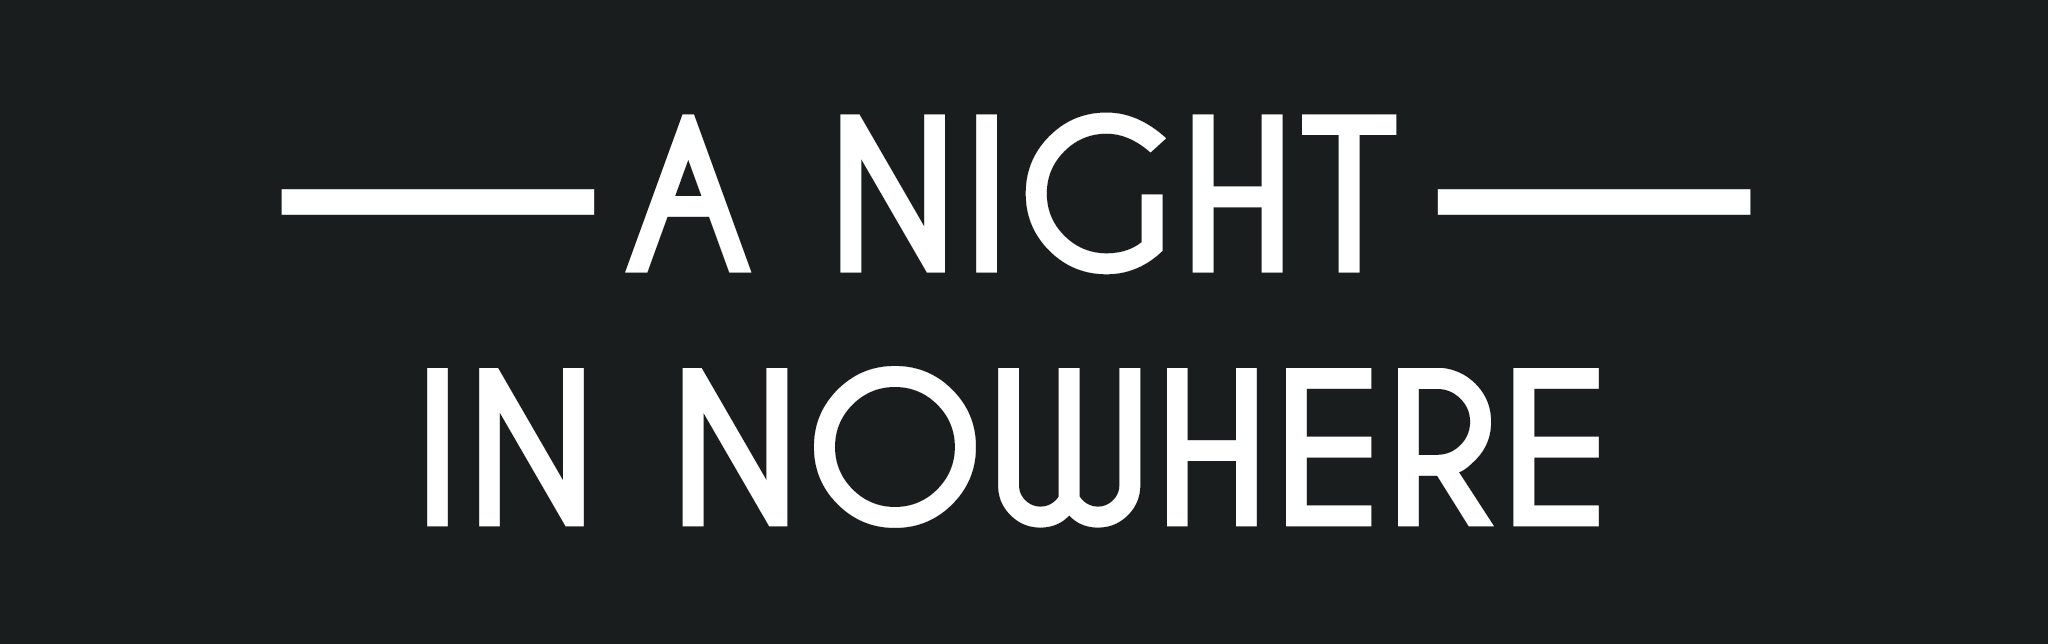 A Night in Nowhere